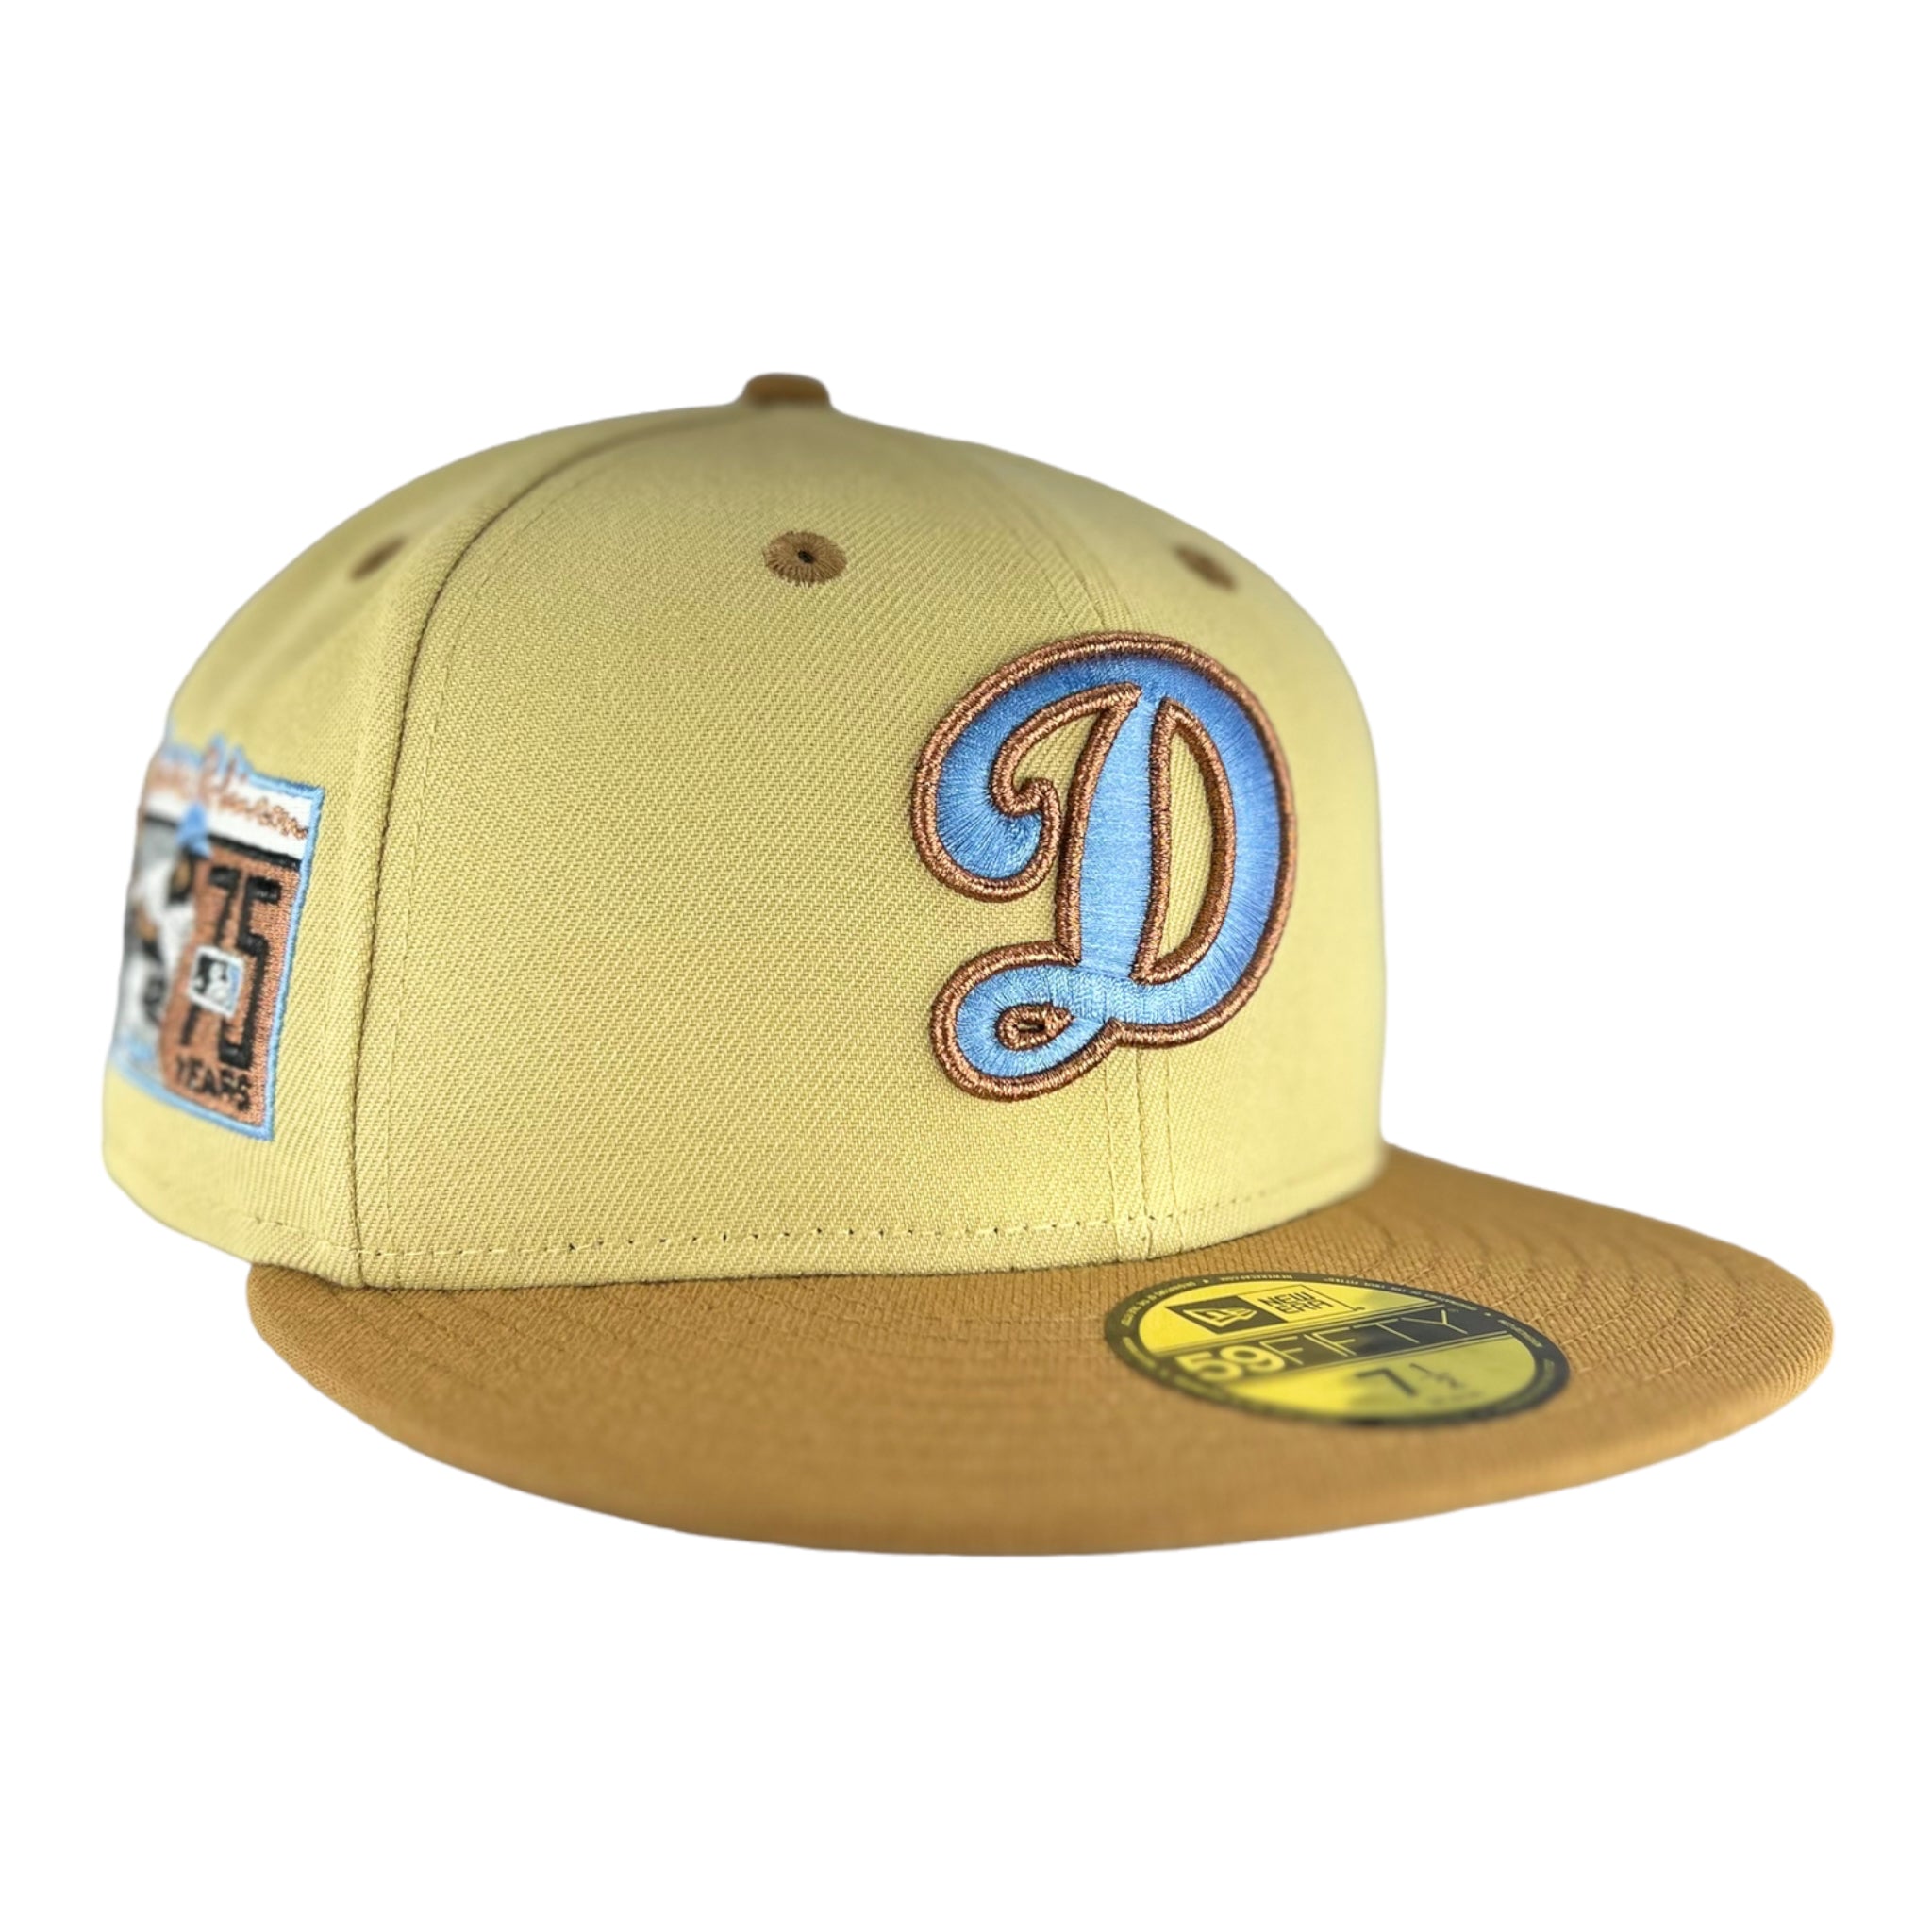 LOS ANGELES RAMS 75TH ANNIVERSARY SOFT YELLOW BRIM NEW ERA FITTED